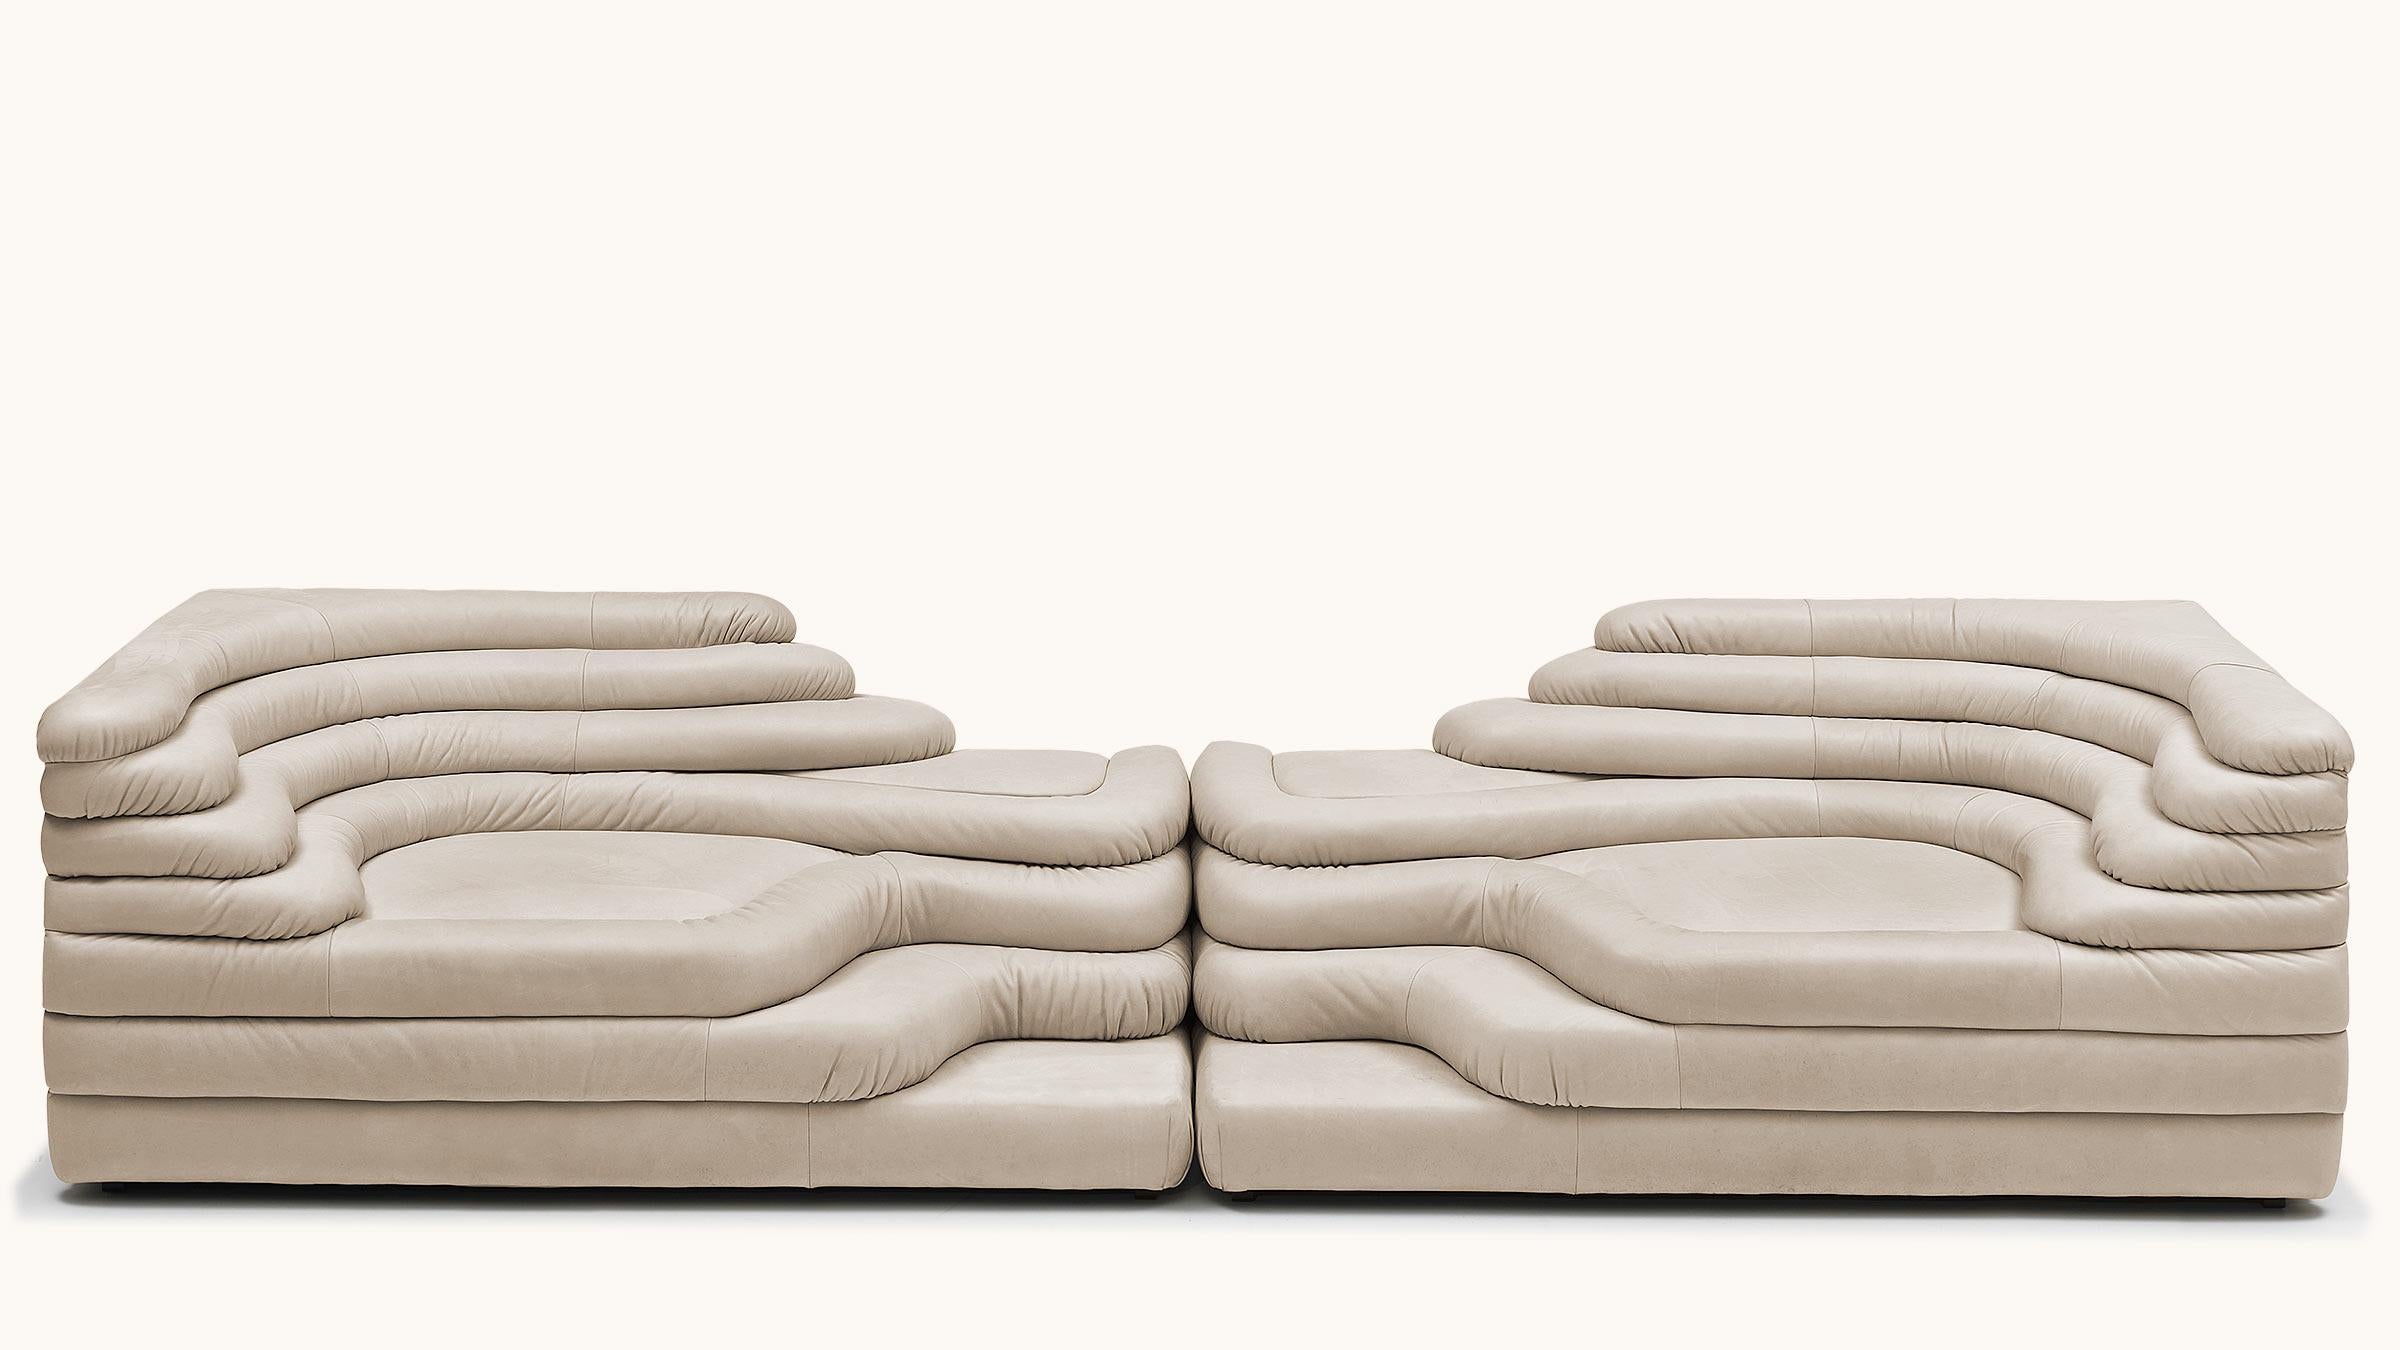 De Sede DS-1025/09 Terrazza Sofa in Perla Upholstery by Ubald Klug In New Condition For Sale In Brooklyn, NY